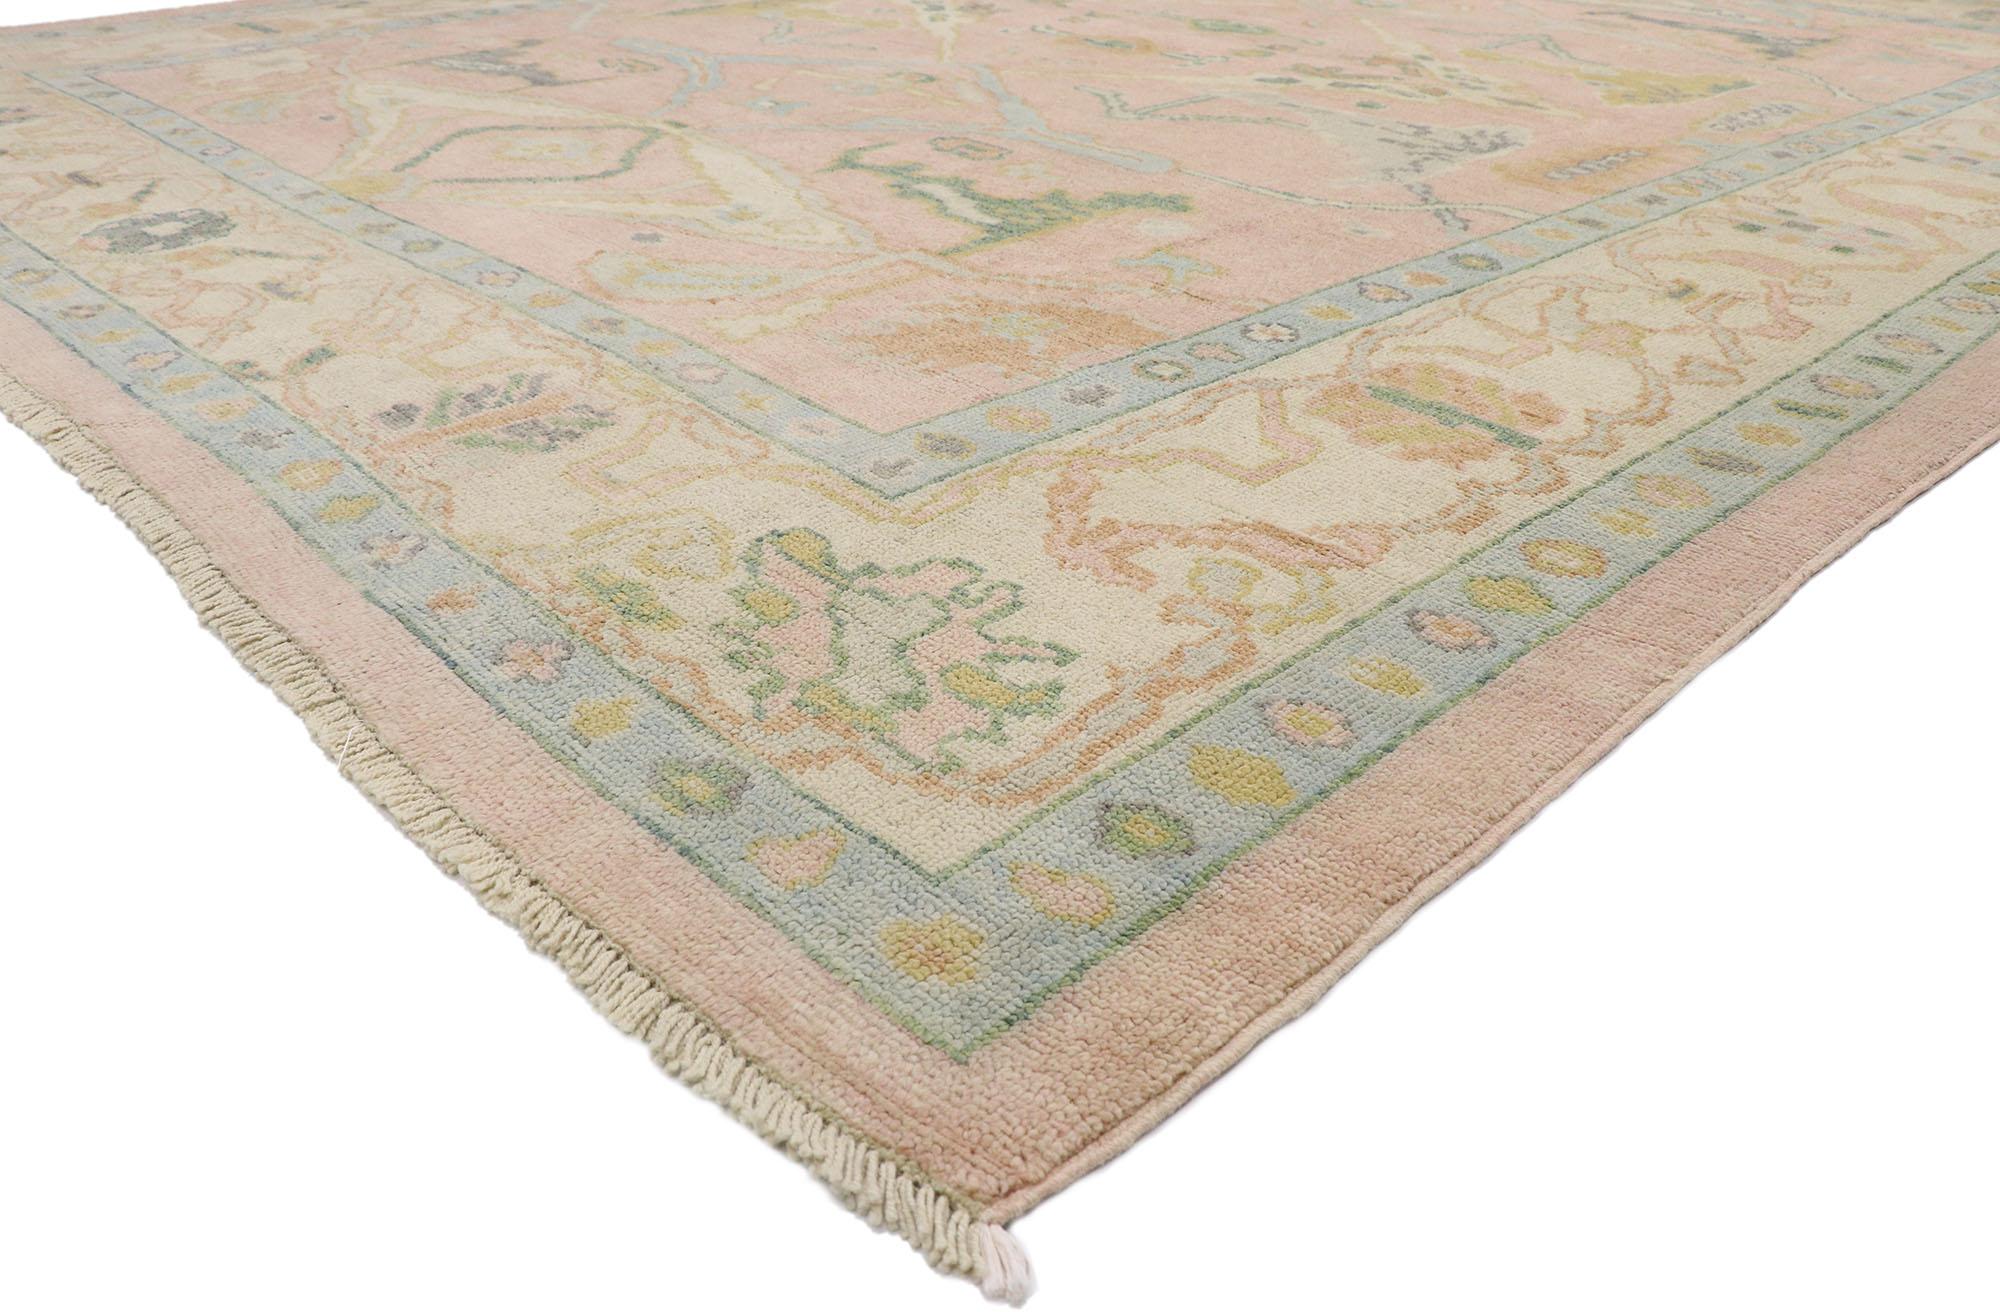 80672 new Contemporary Pakistani Oushak rug with Modern Georgian style 12'00 x 14'09. This hand-knotted wool contemporary Pakistani Oushak rug features an all-over botanical lattice pattern spread across an abrashed rose colored field. An array of